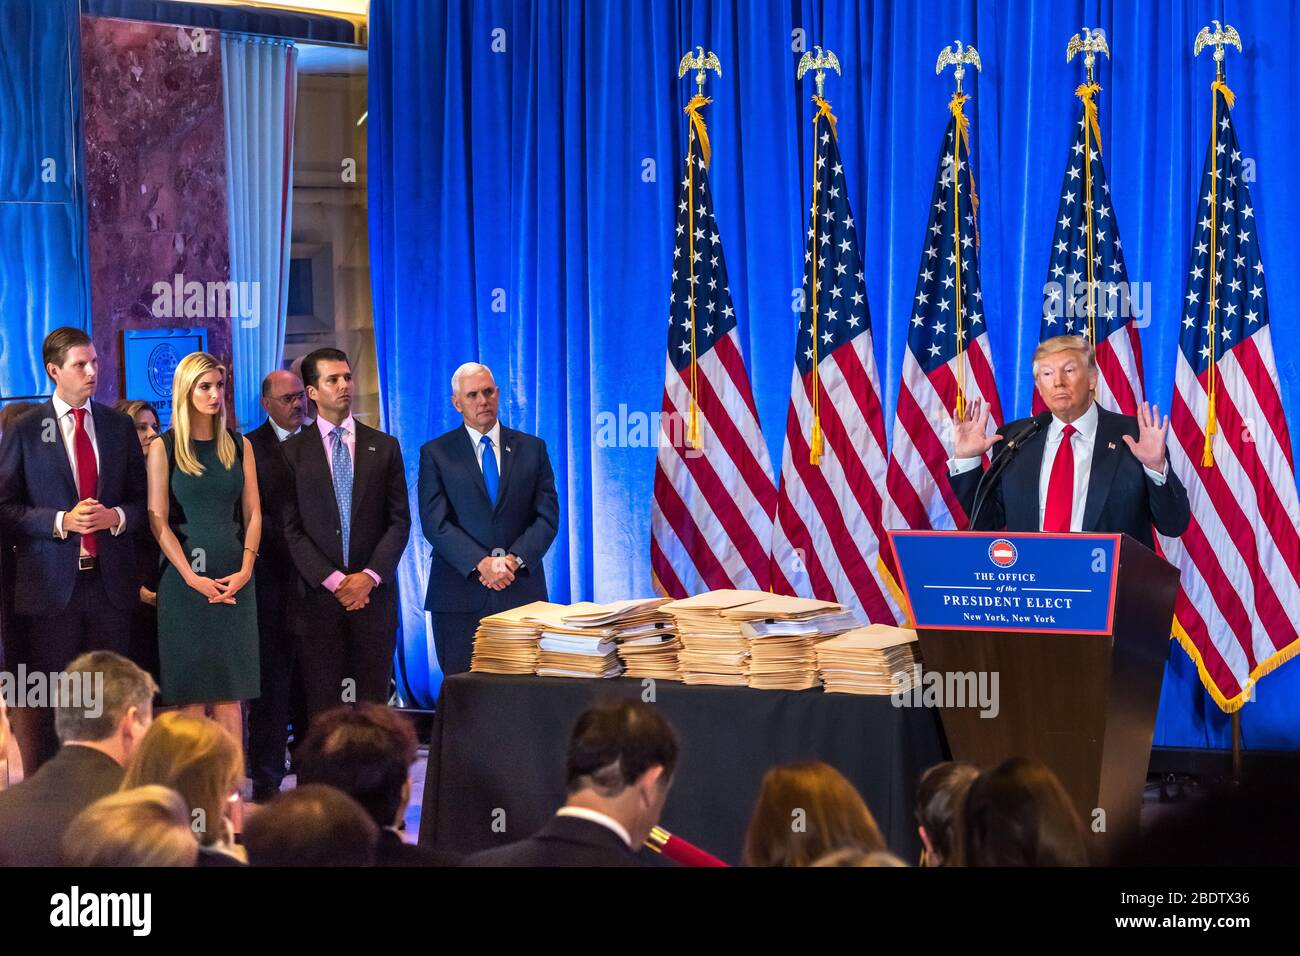 New York, USA, 11 Jan 2017 - US President-elect Donald Trump addresses a press conference watched by (L-R): his son Eric, daughter Ivanka, Allen Weiss Stock Photo